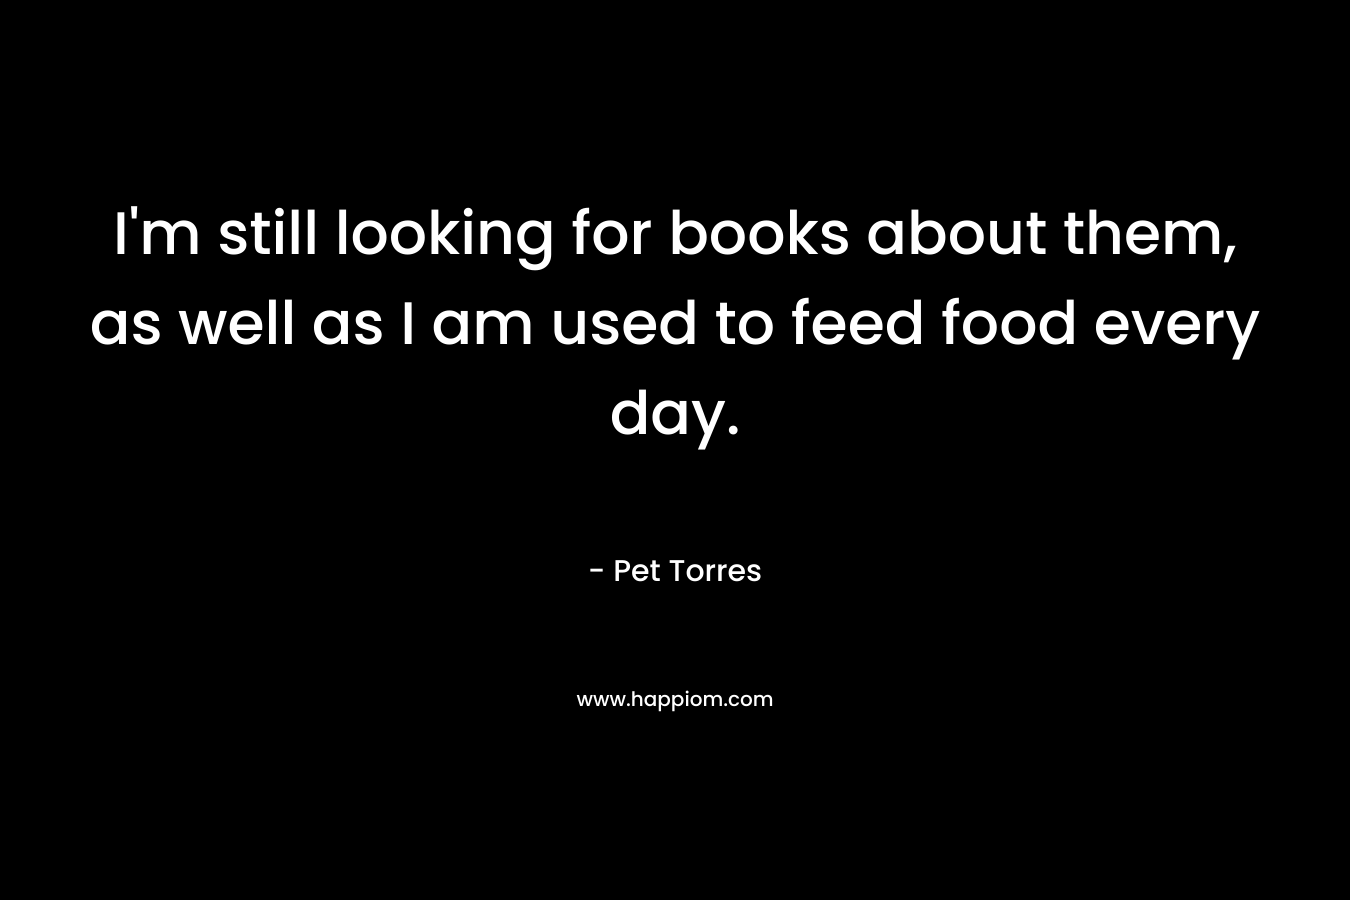 I’m still looking for books about them, as well as I am used to feed food every day. – Pet Torres